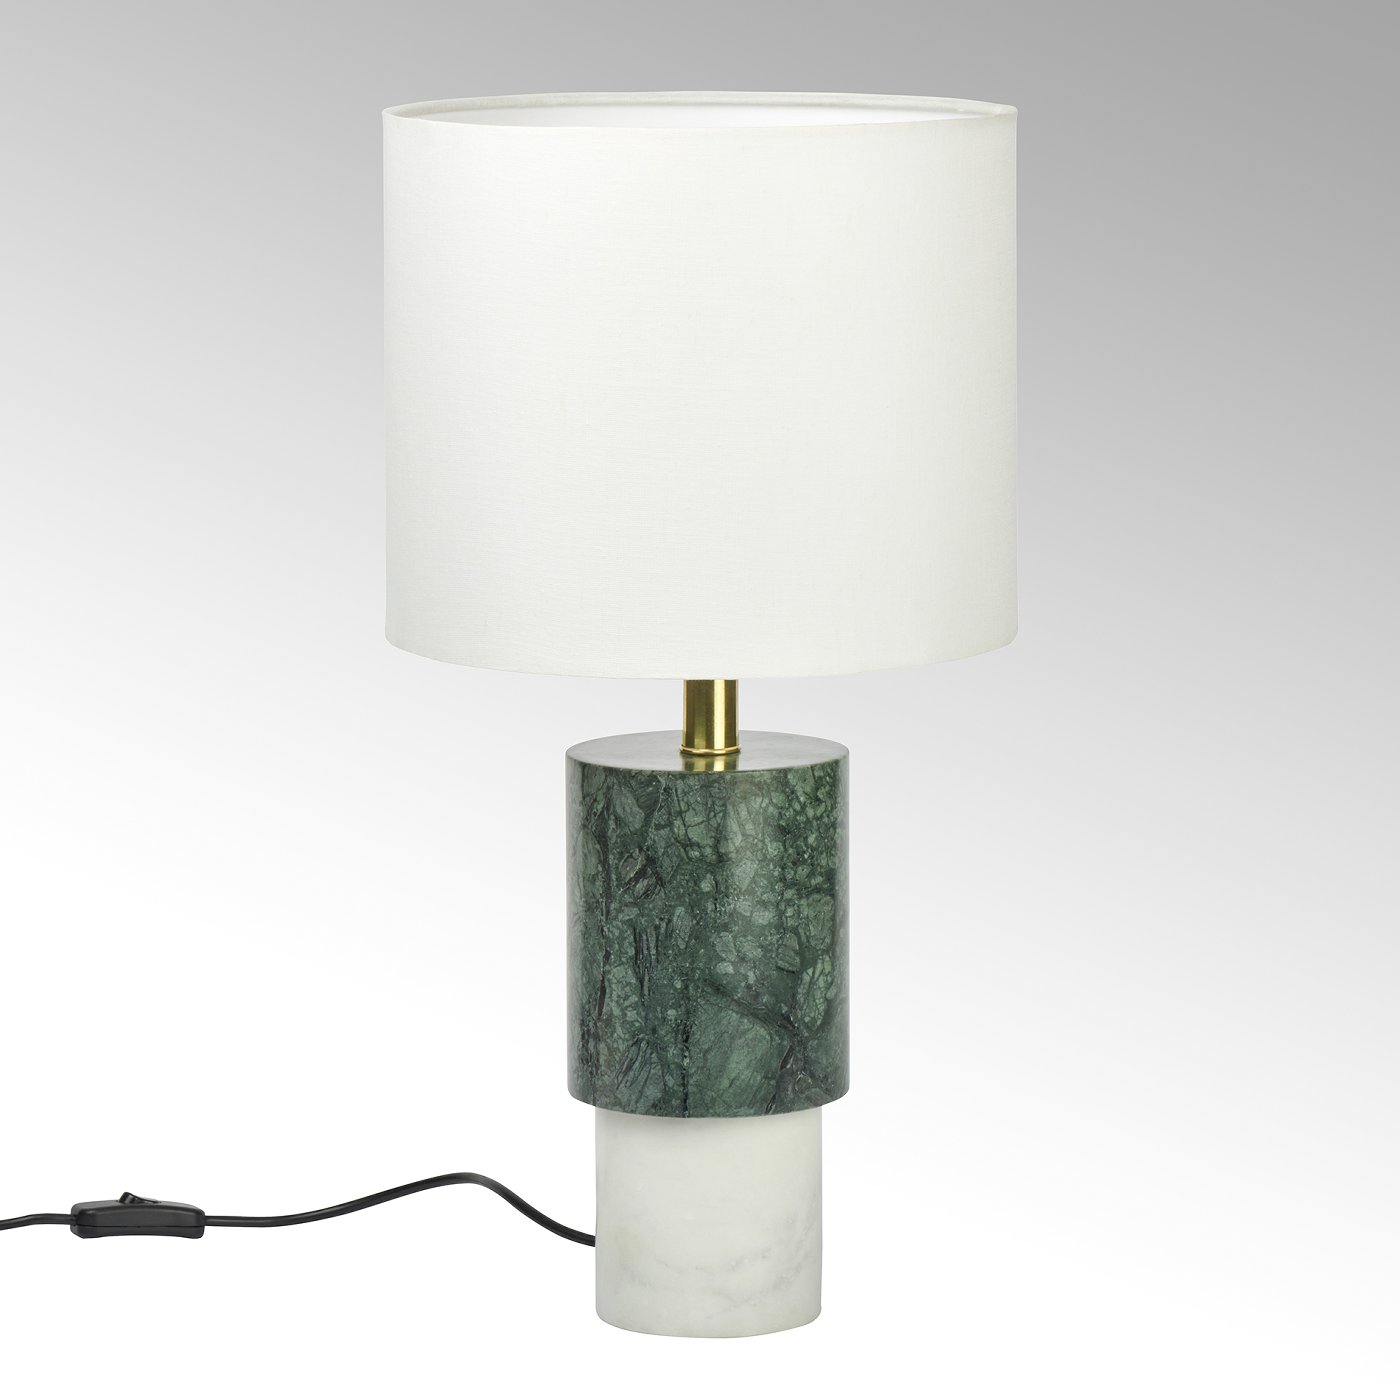 Fifth Avenue table lamp with round shade